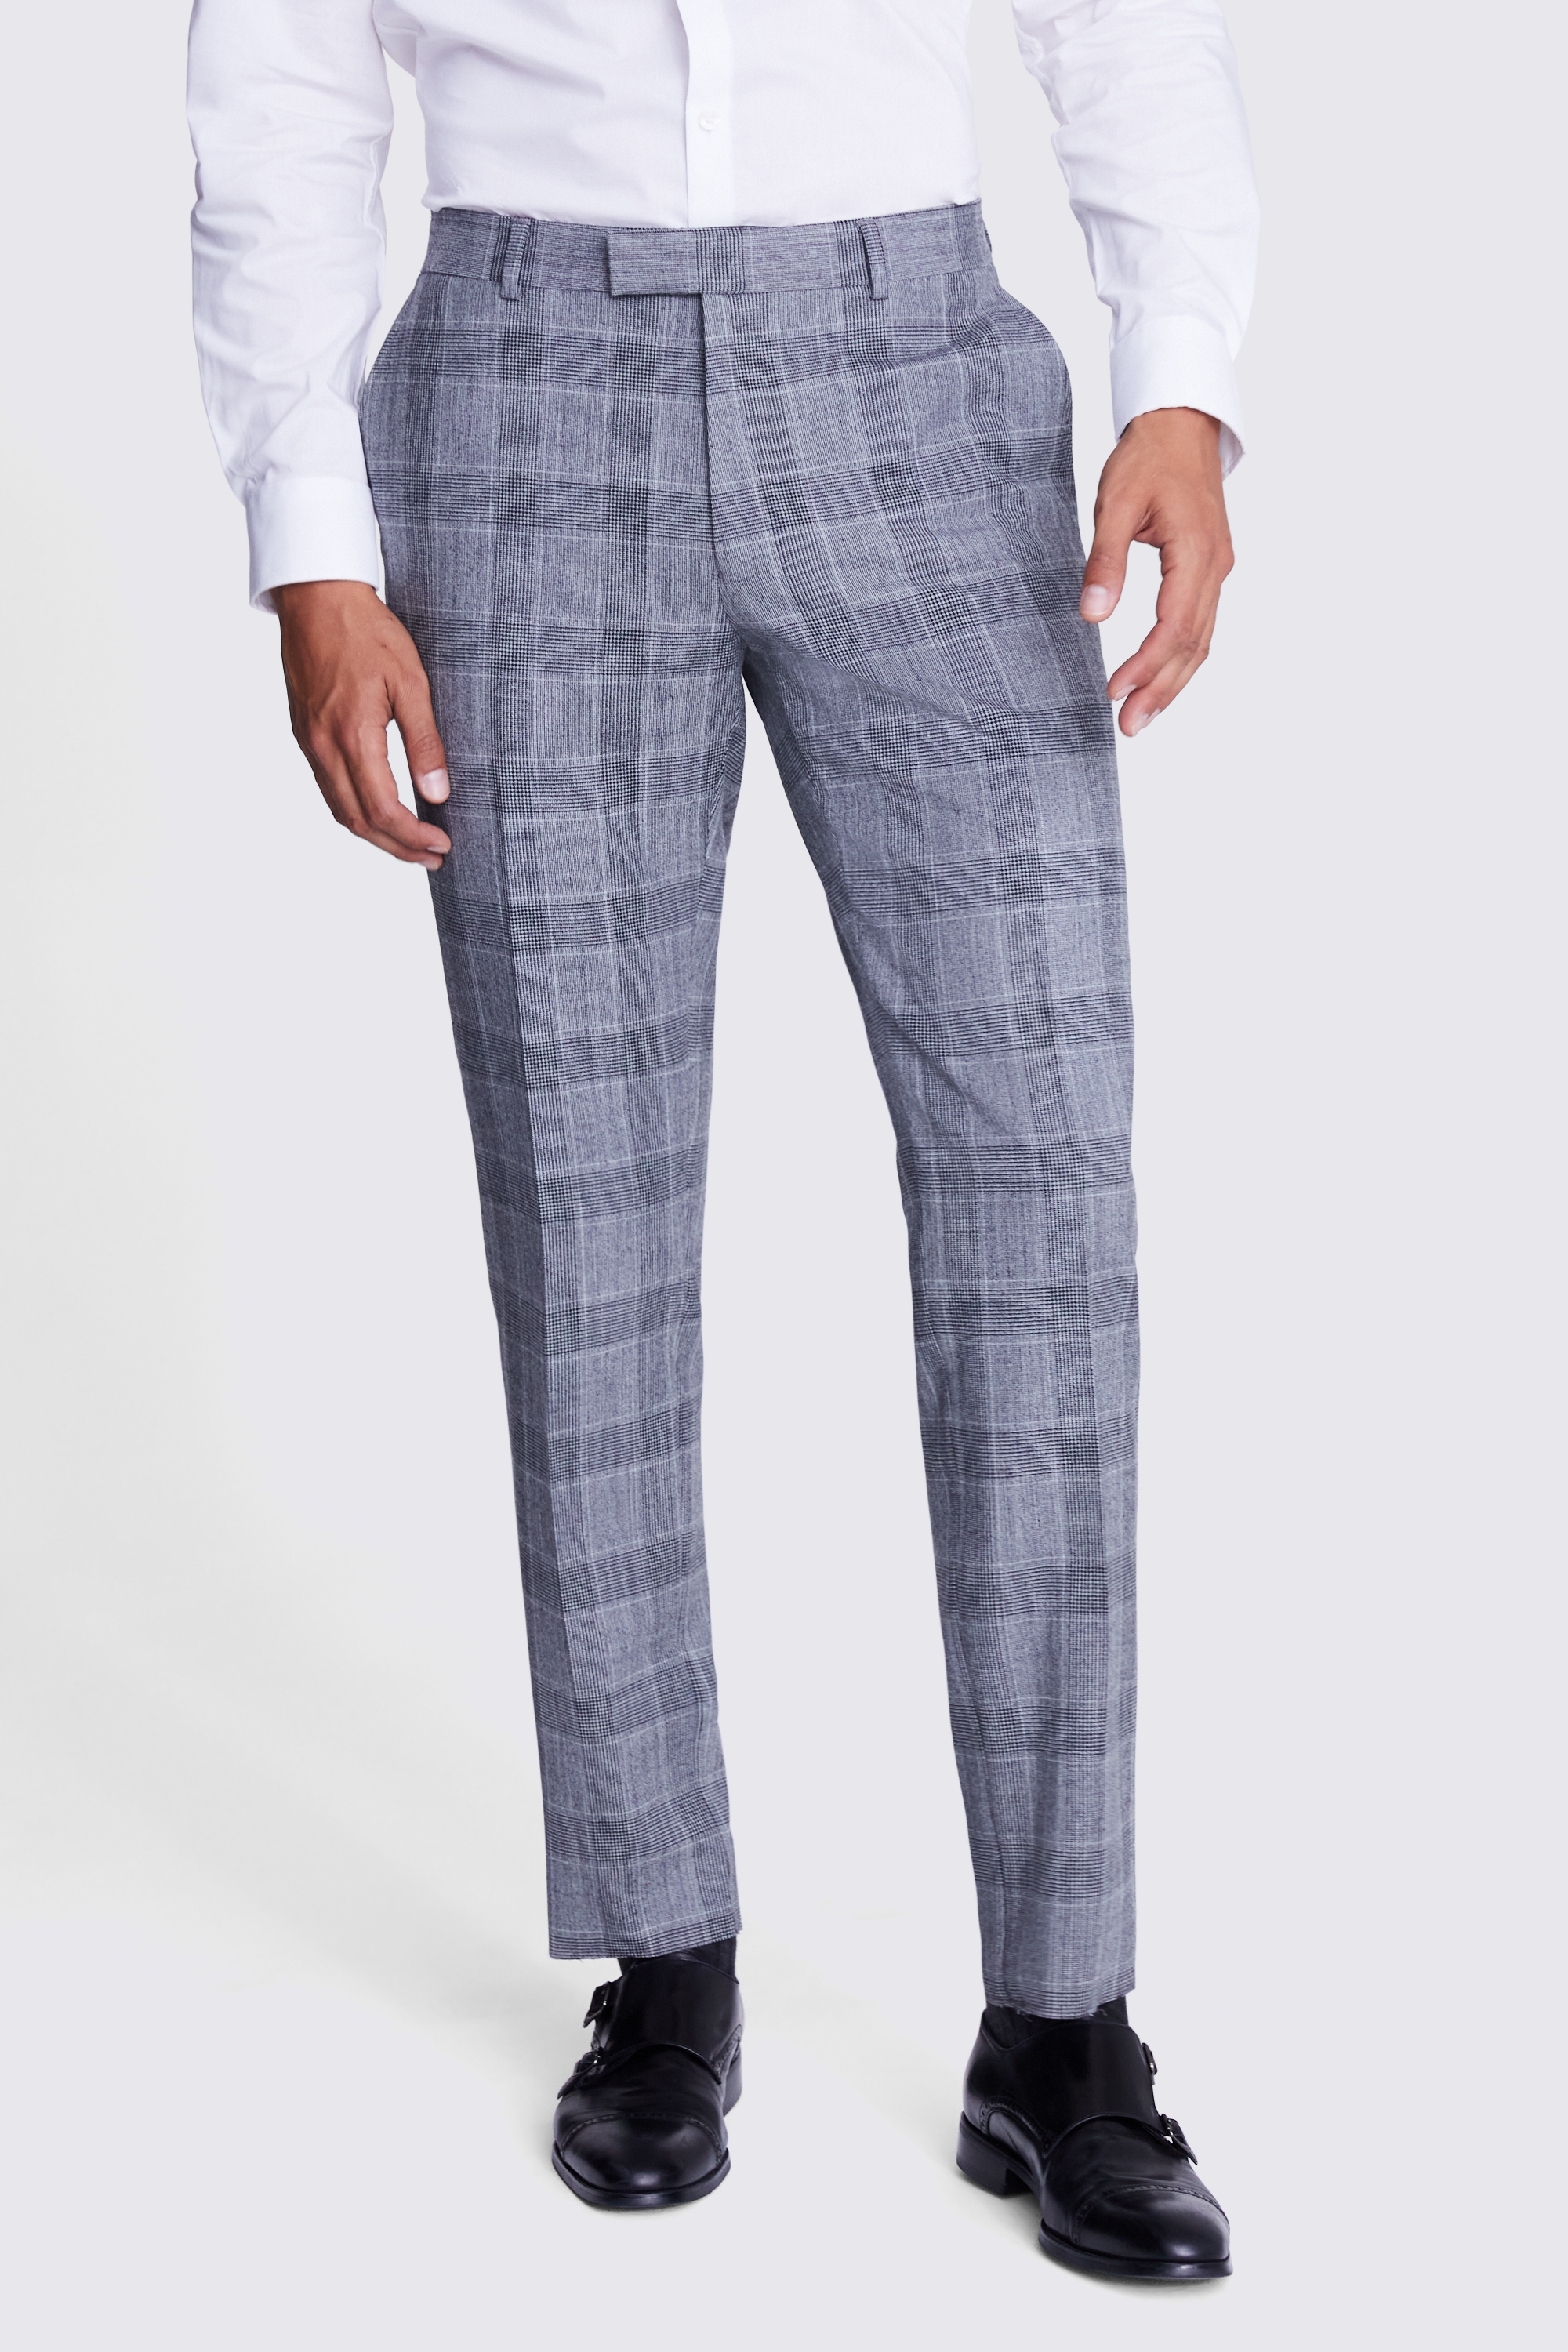 Tailored Fit Black & White Check Trousers | Buy Online at Moss